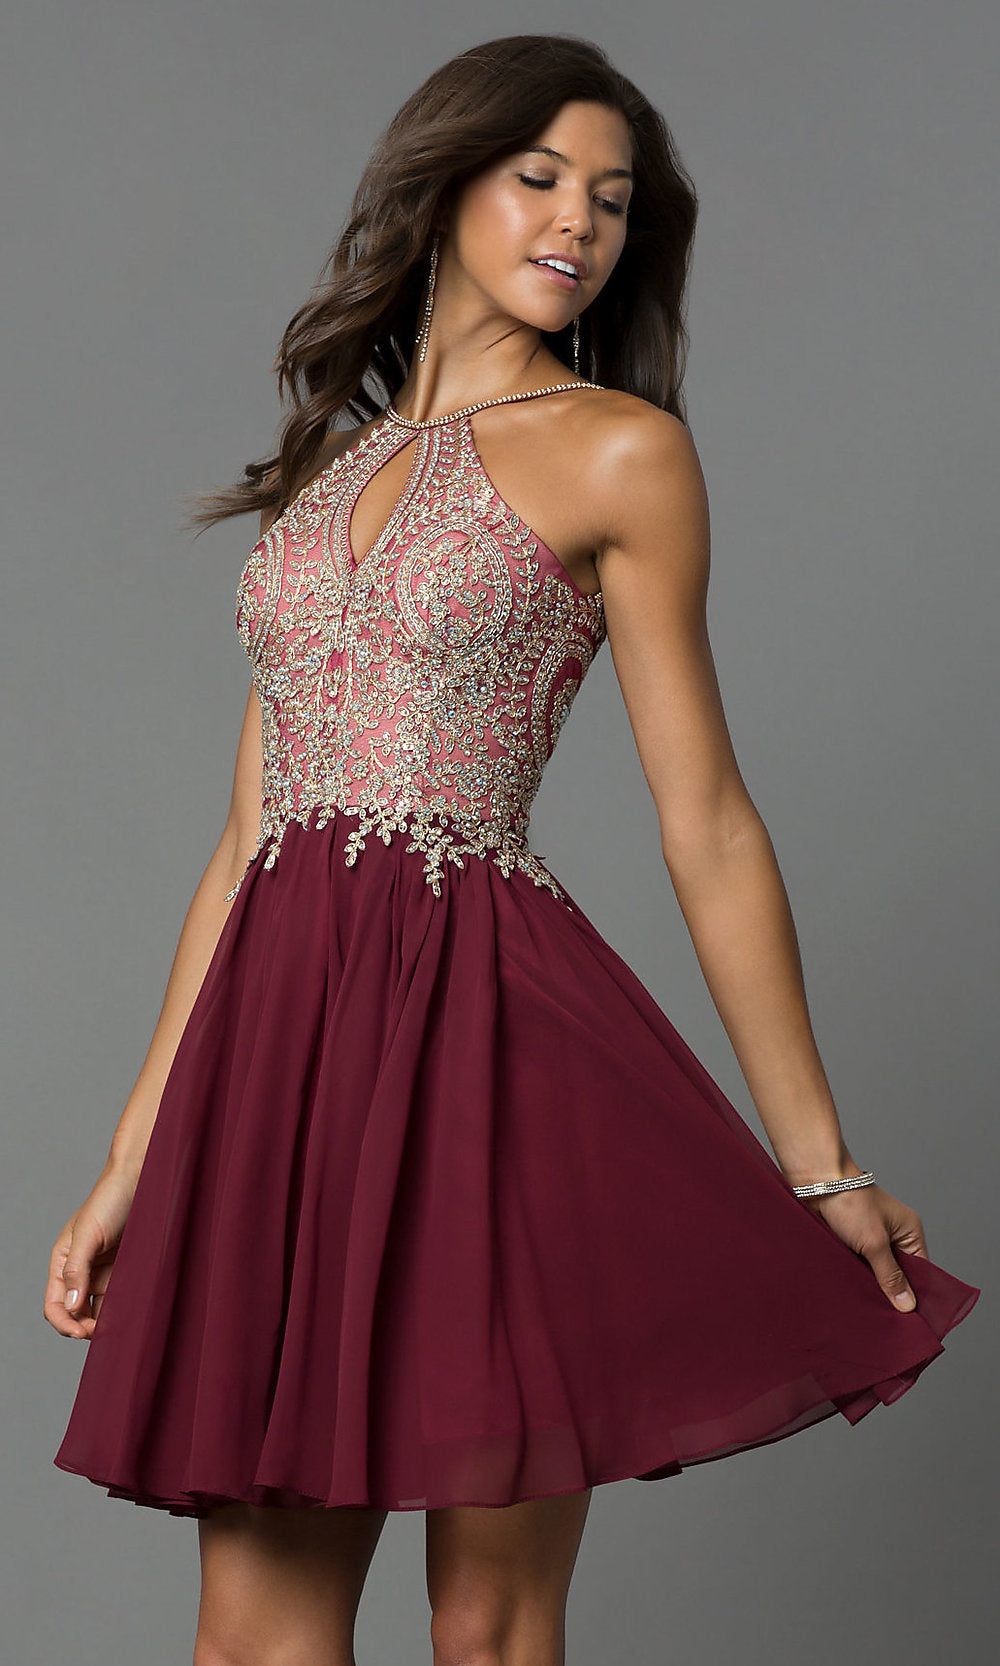  Short Homecoming Dress with Beaded High-Neck Bodice